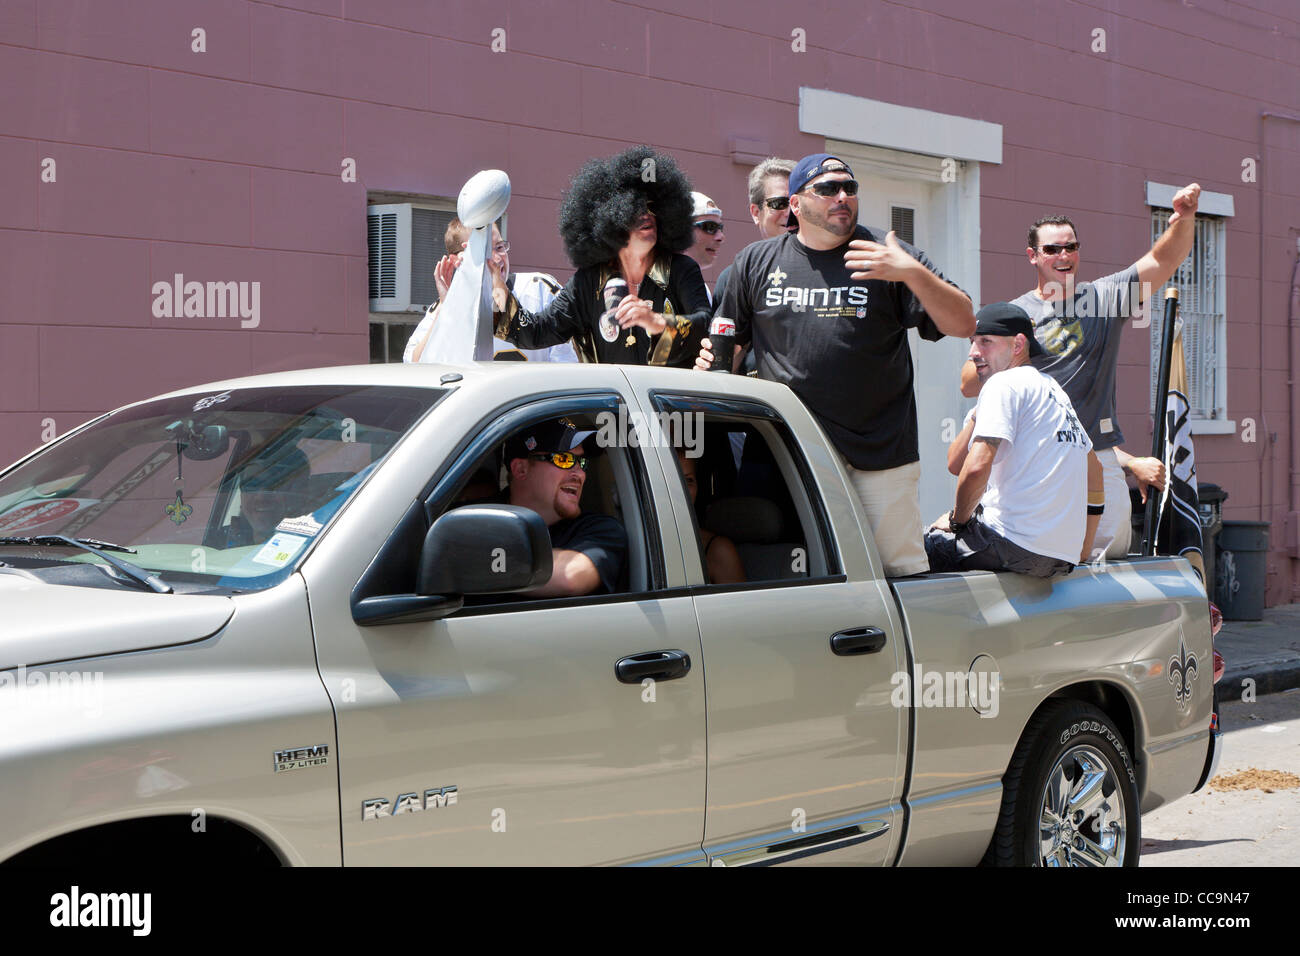 Fans of the New Orleans Saints football team celebrate while driving around in the French Quarter of New Orleans, LA Stock Photo